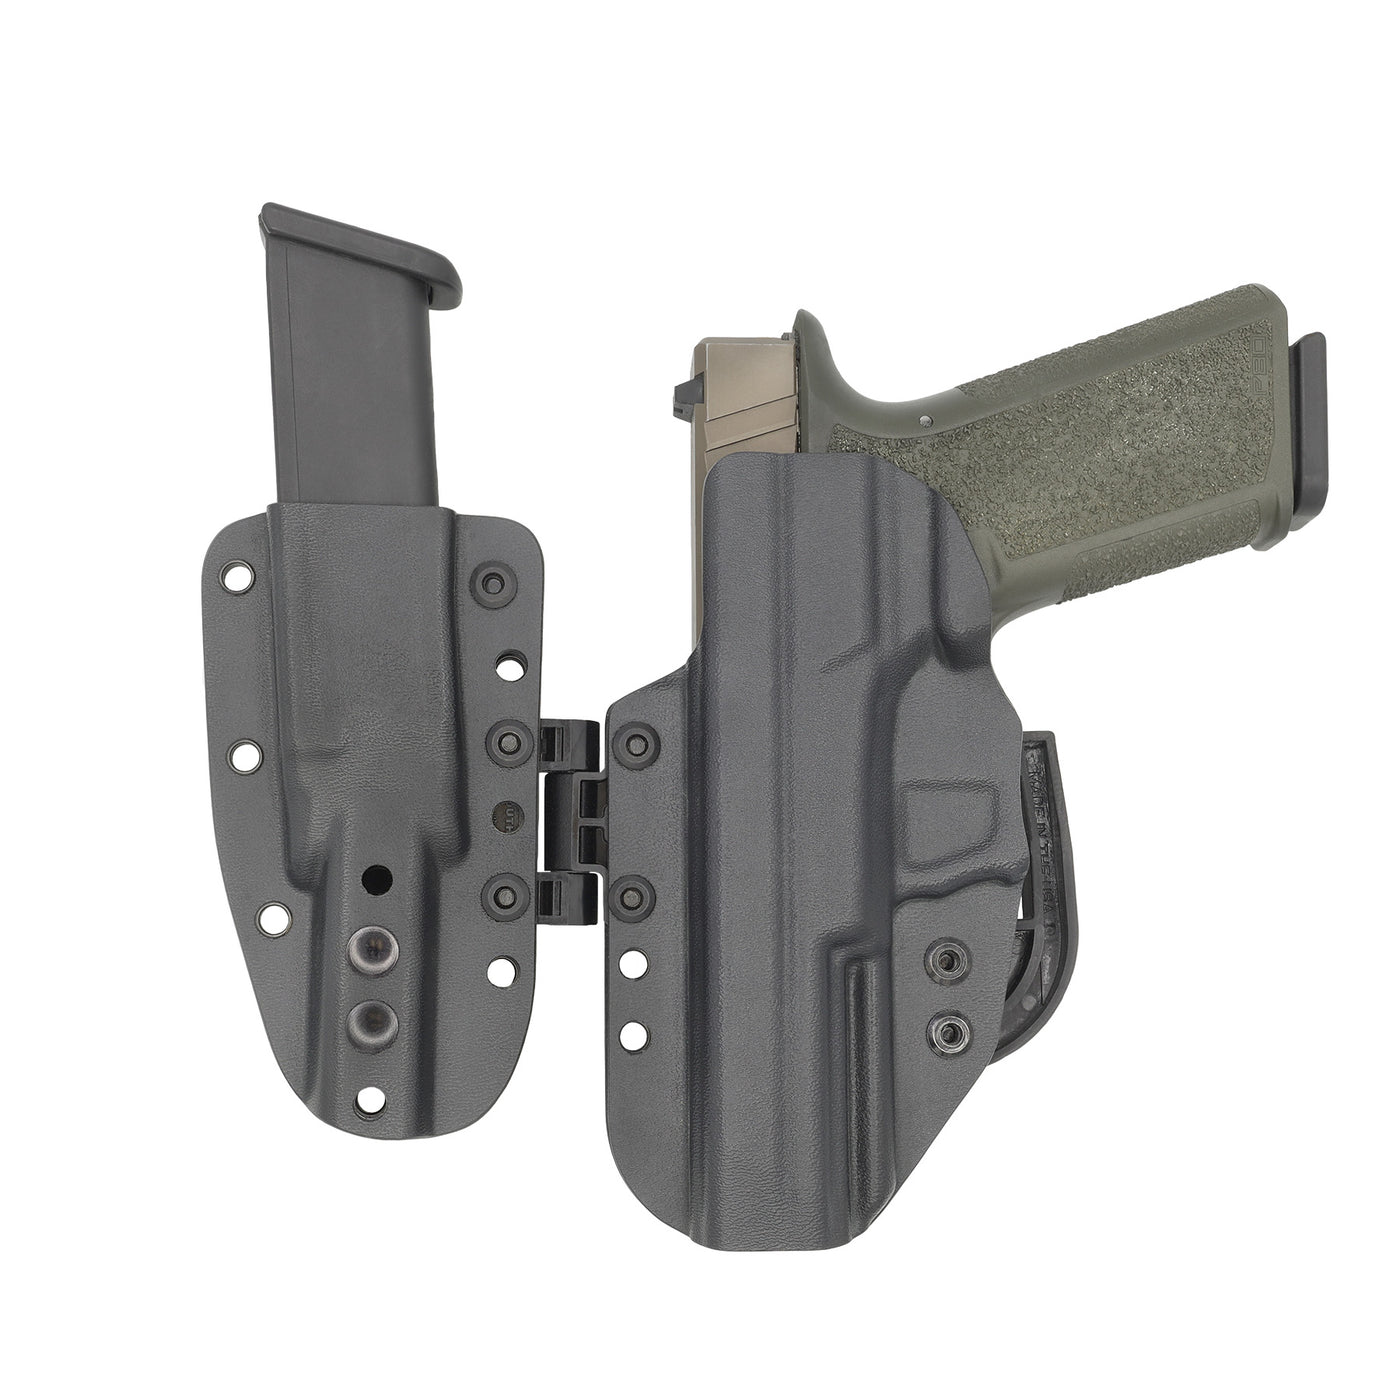 C&G Holsters Custom AIWB covert MOD1 Poly80 c/v2 in holstered position back view